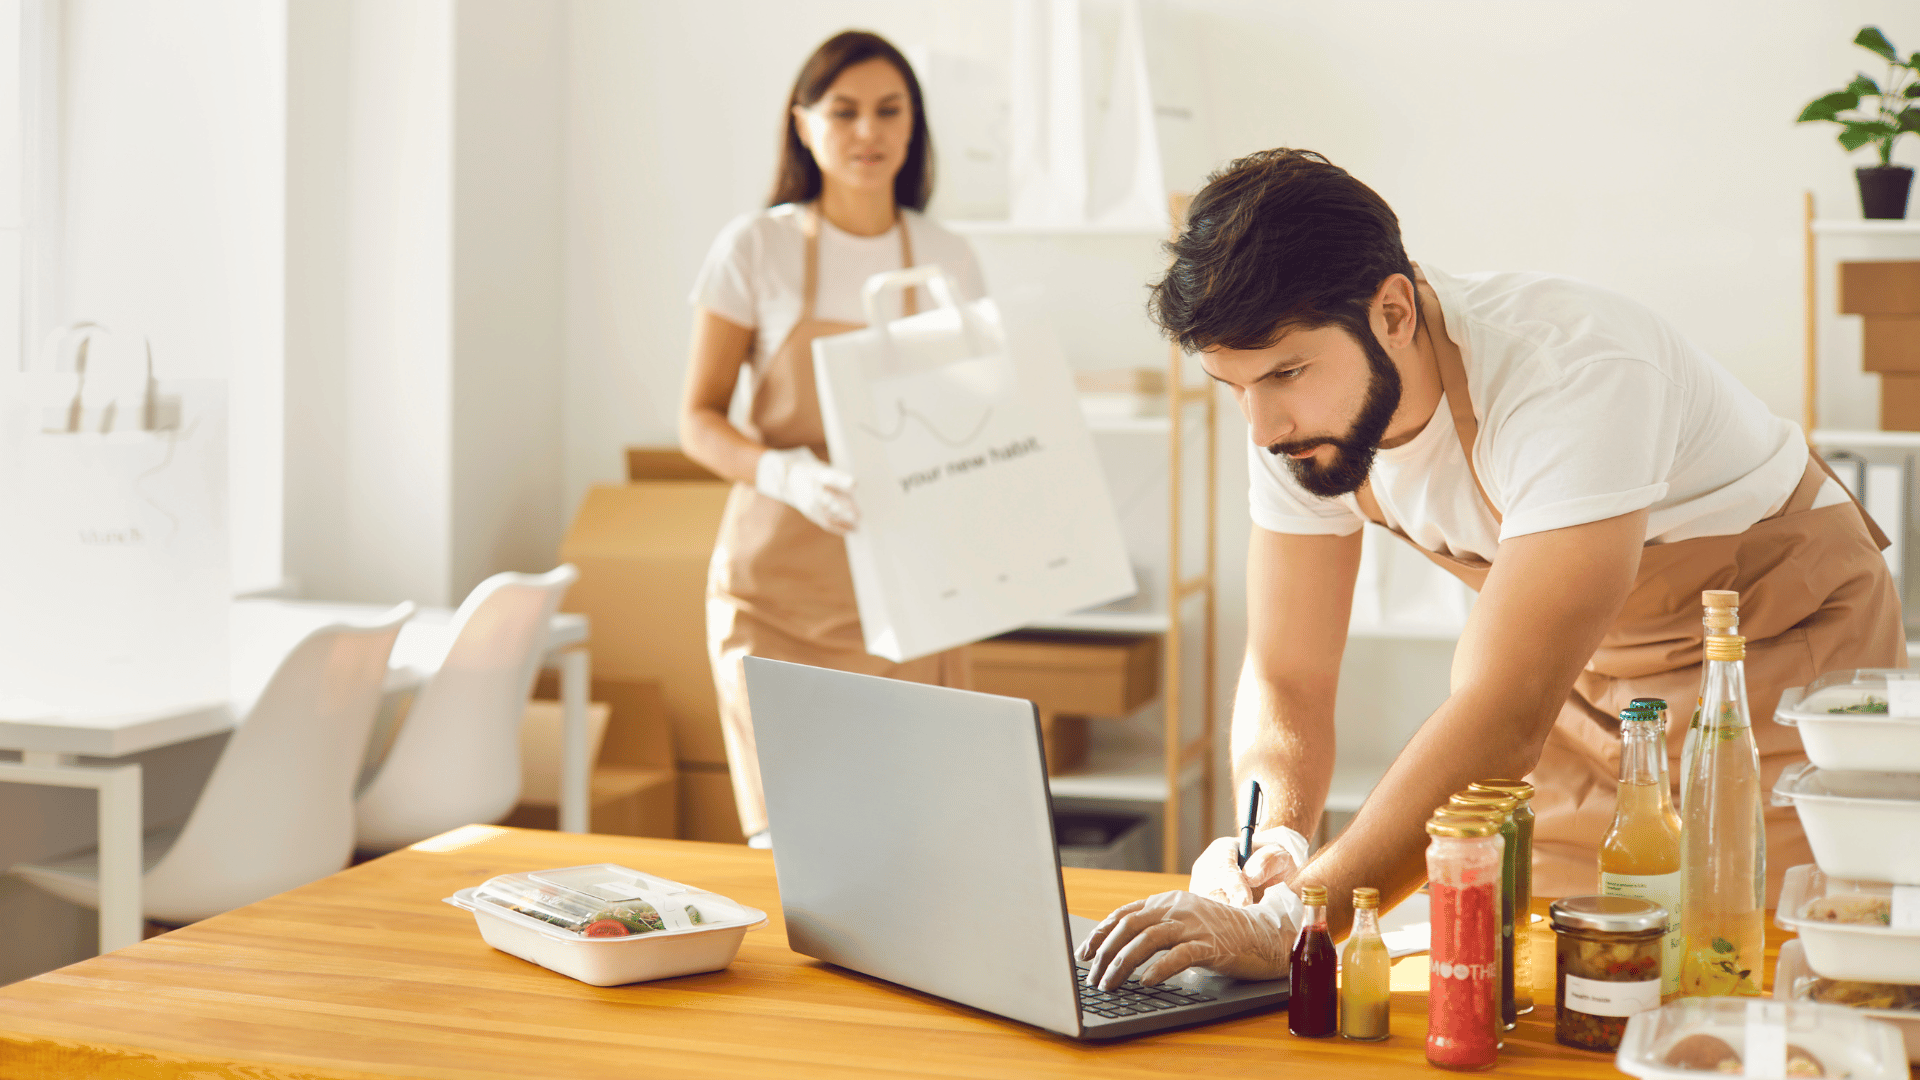 Man looking at computer with food around woman in background packing food into bag